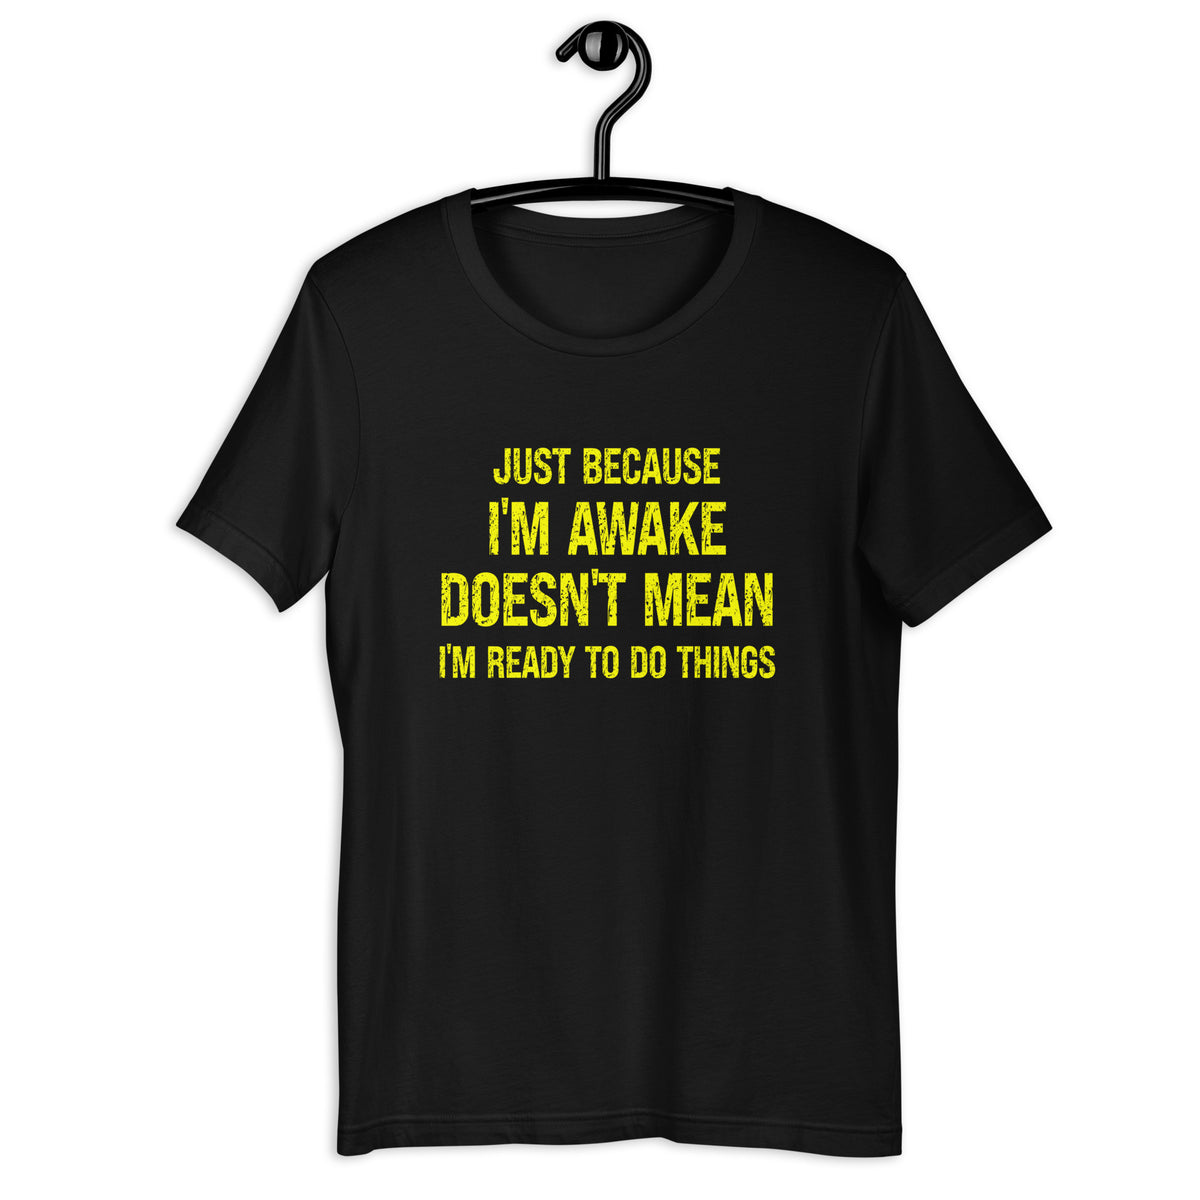 Just Because I'm Awake Doesn't Mean I'm Ready To Do Things T-Shirt - SHOPNOO